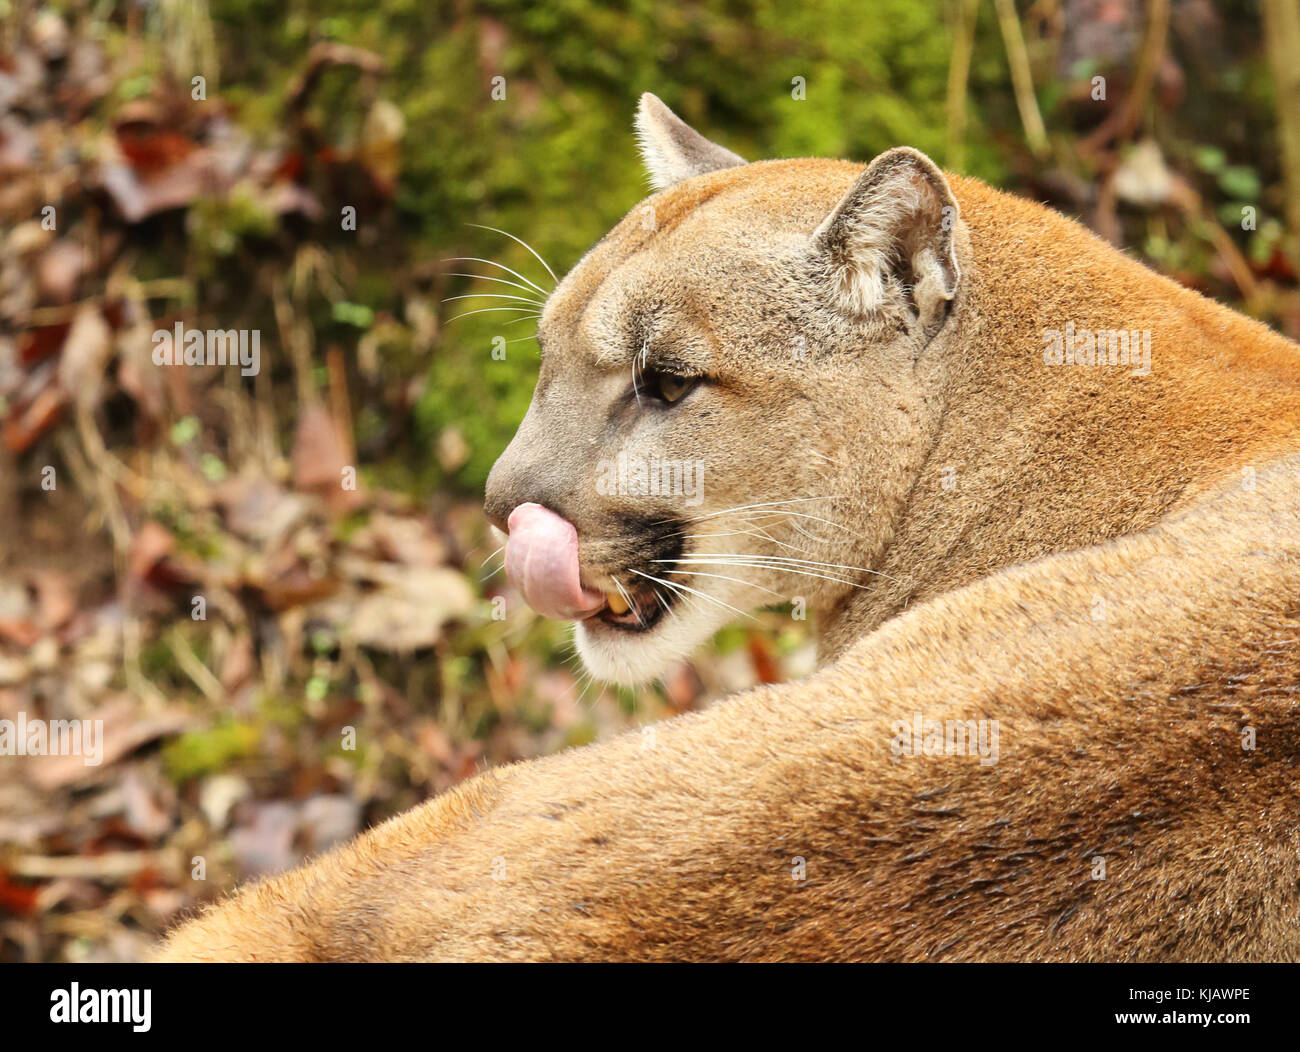 a-puma-licking-its-lips-while-considering-its-next-move-KJAWPE.jpg